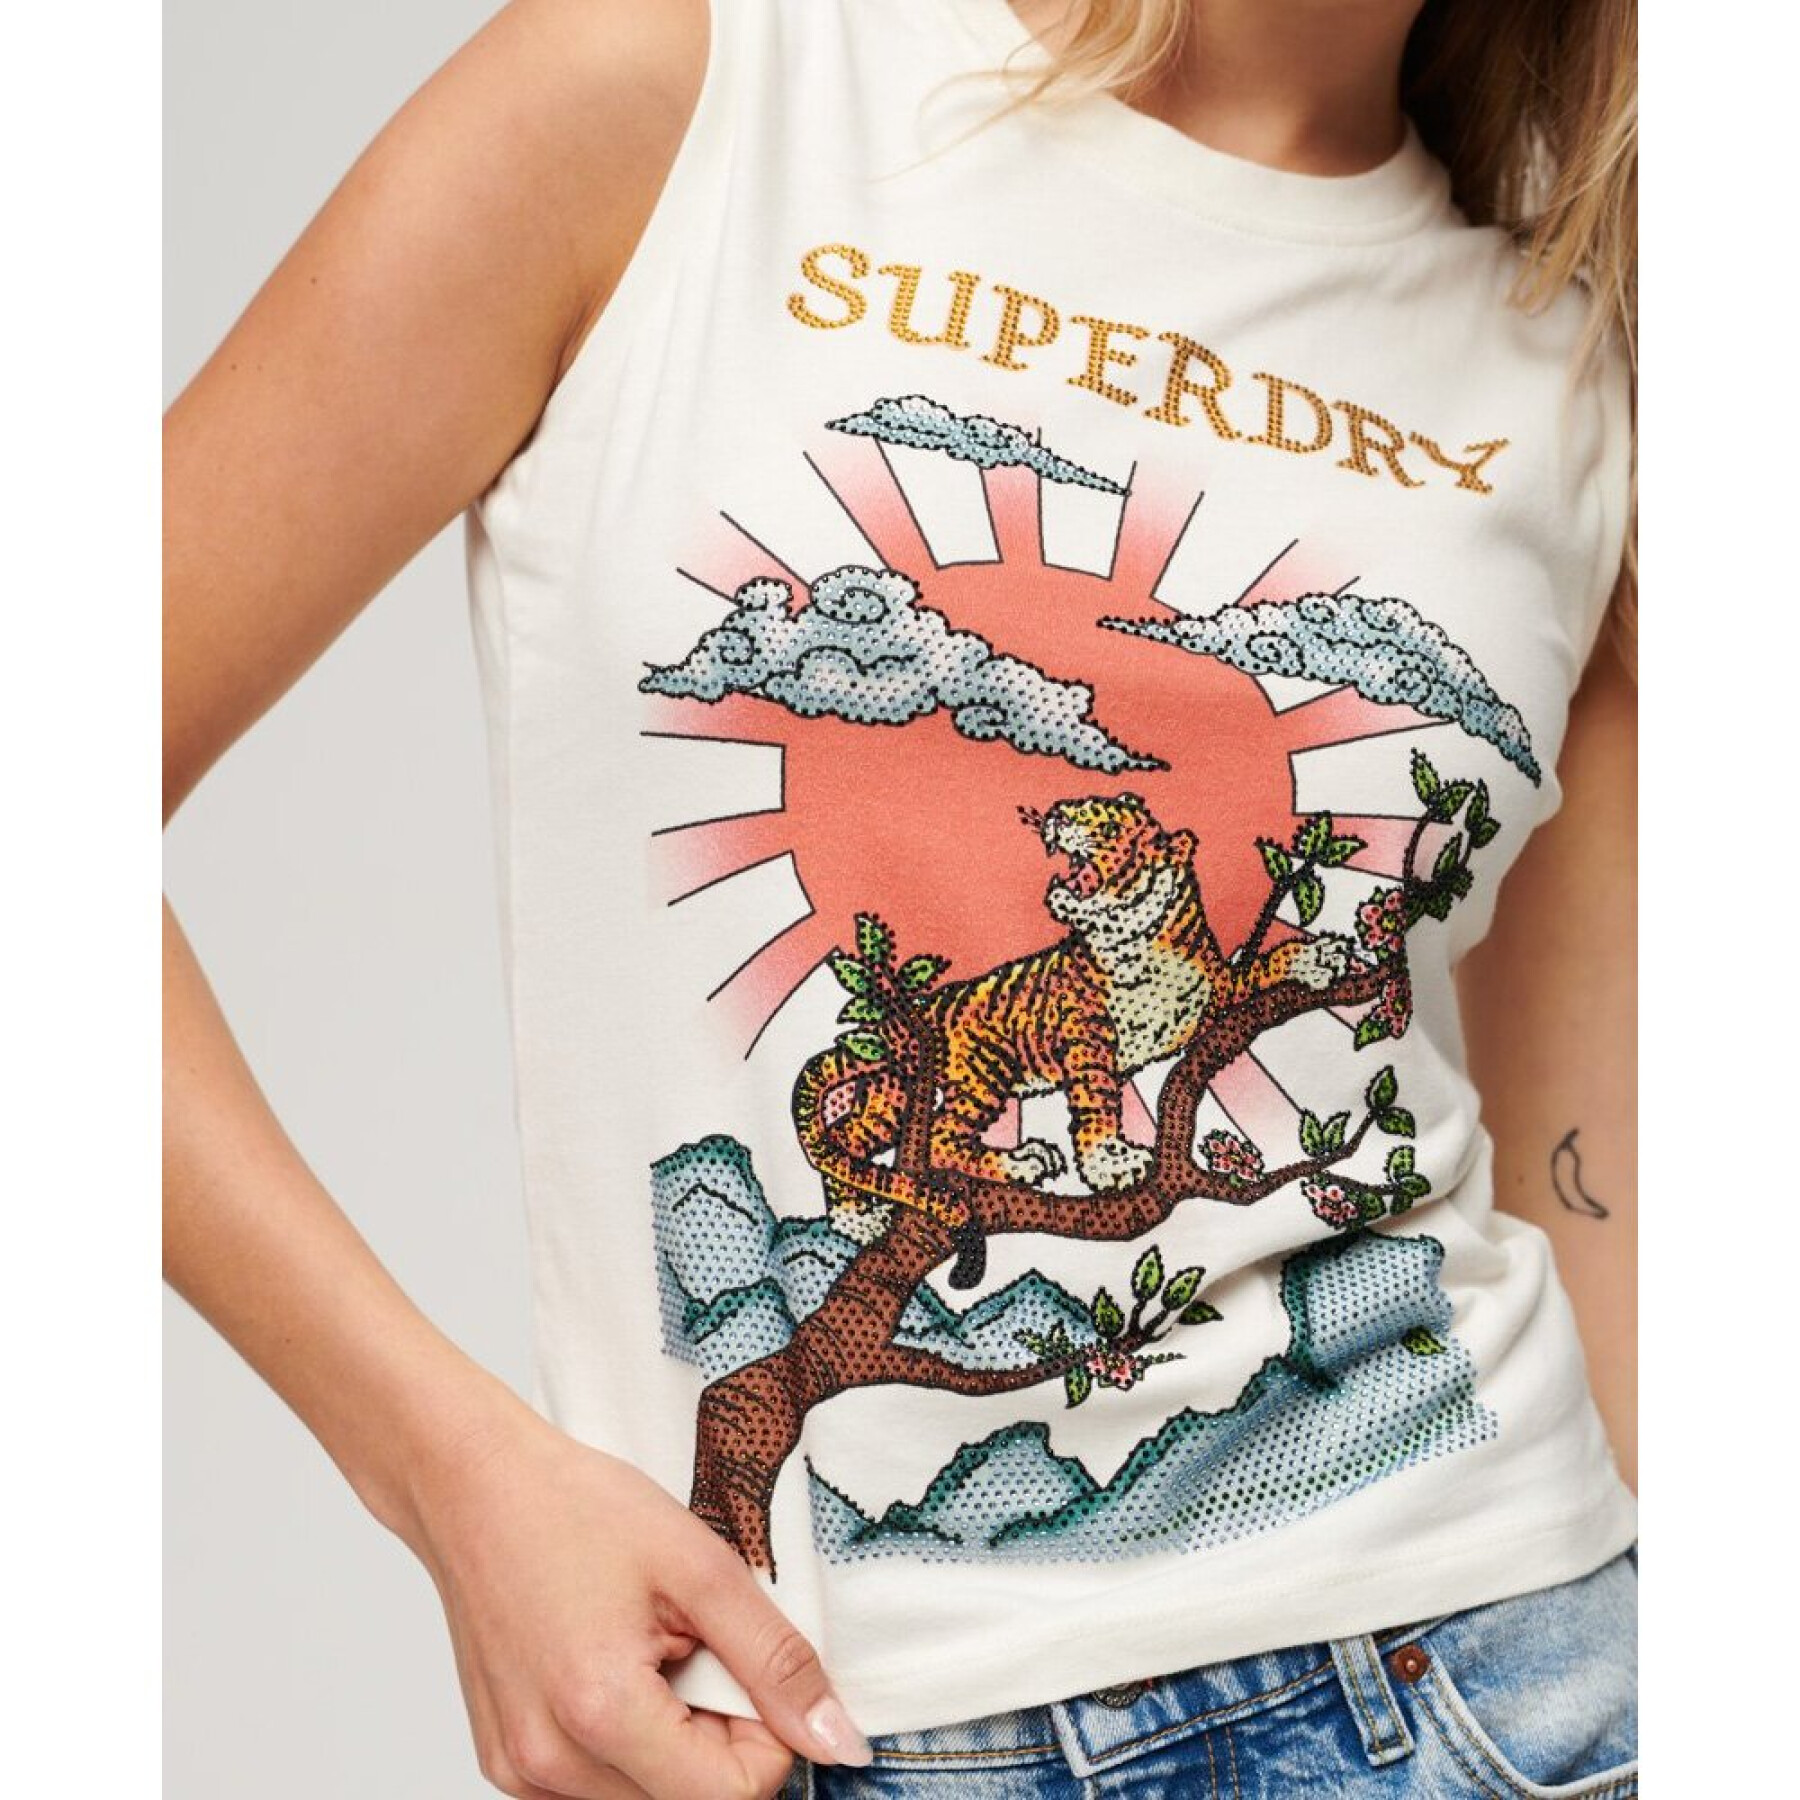 Women's rhinestone tank top with tattoo effect Superdry